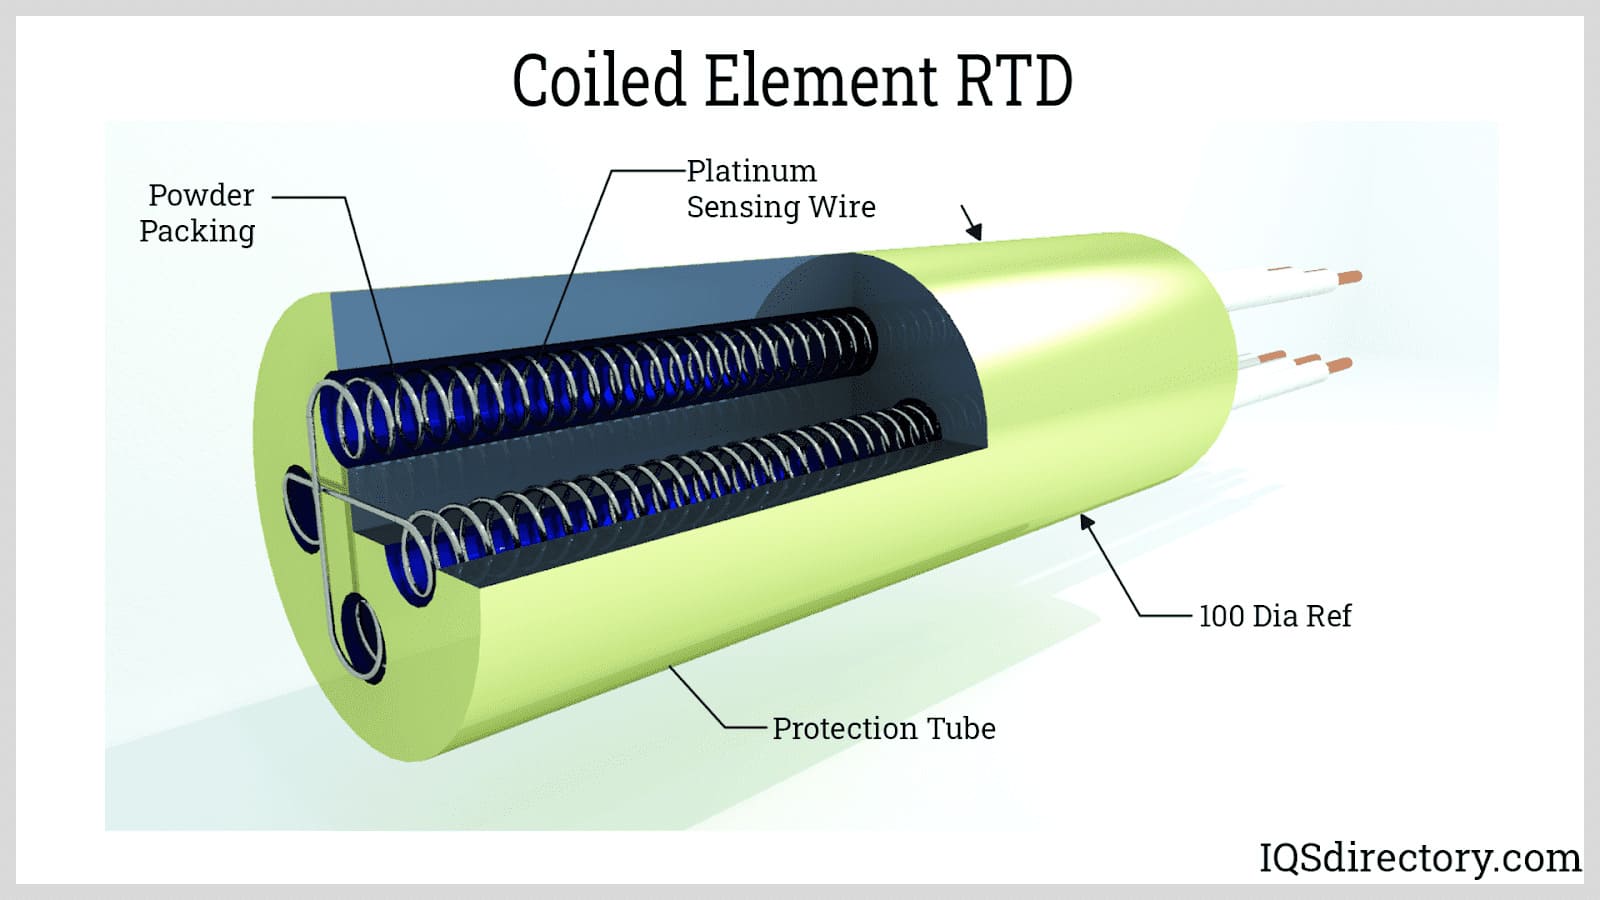 Coiled Element RTD